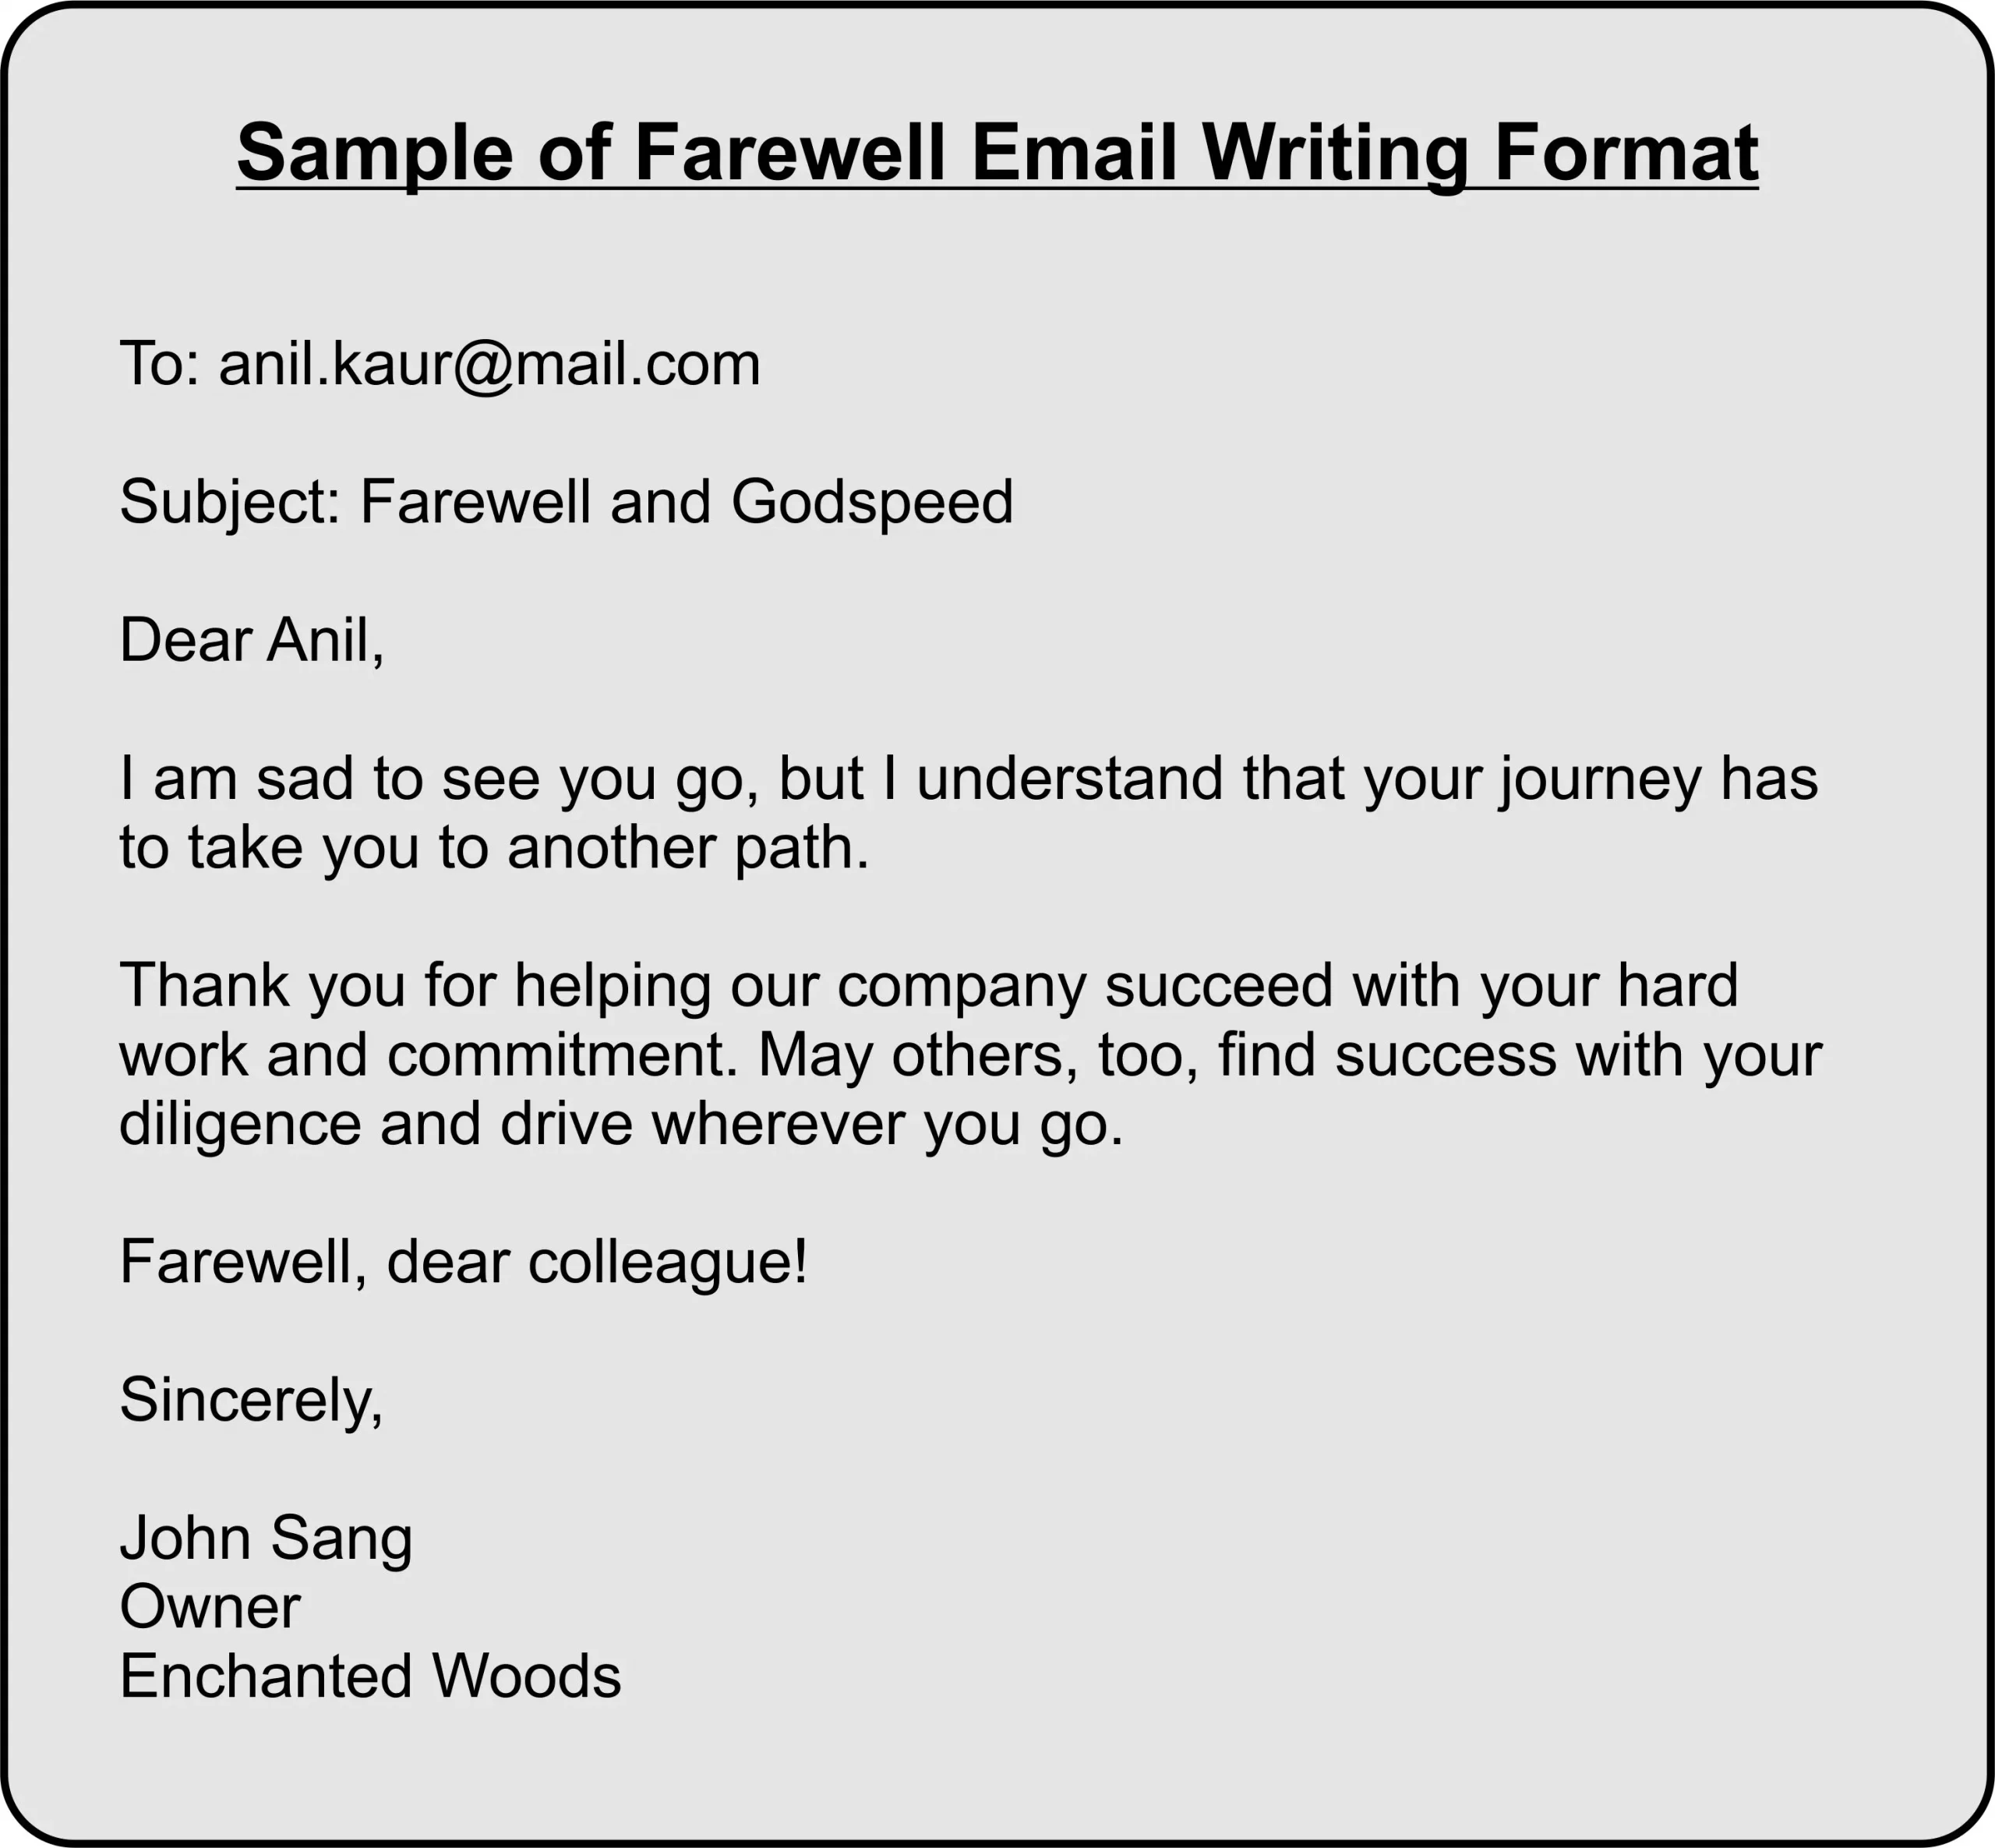 Email Writing Format Samples